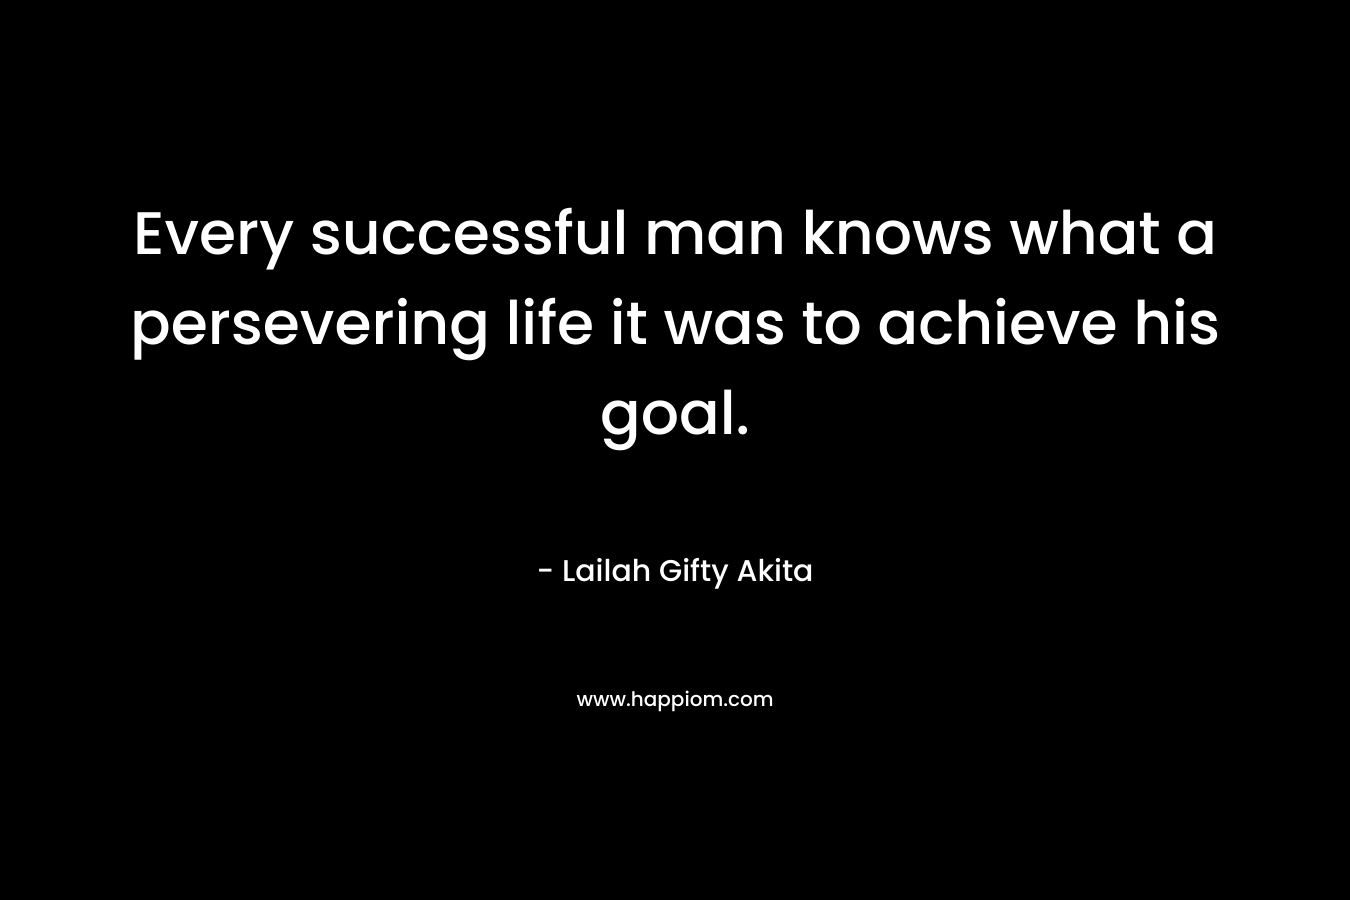 Every successful man knows what a persevering life it was to achieve his goal.